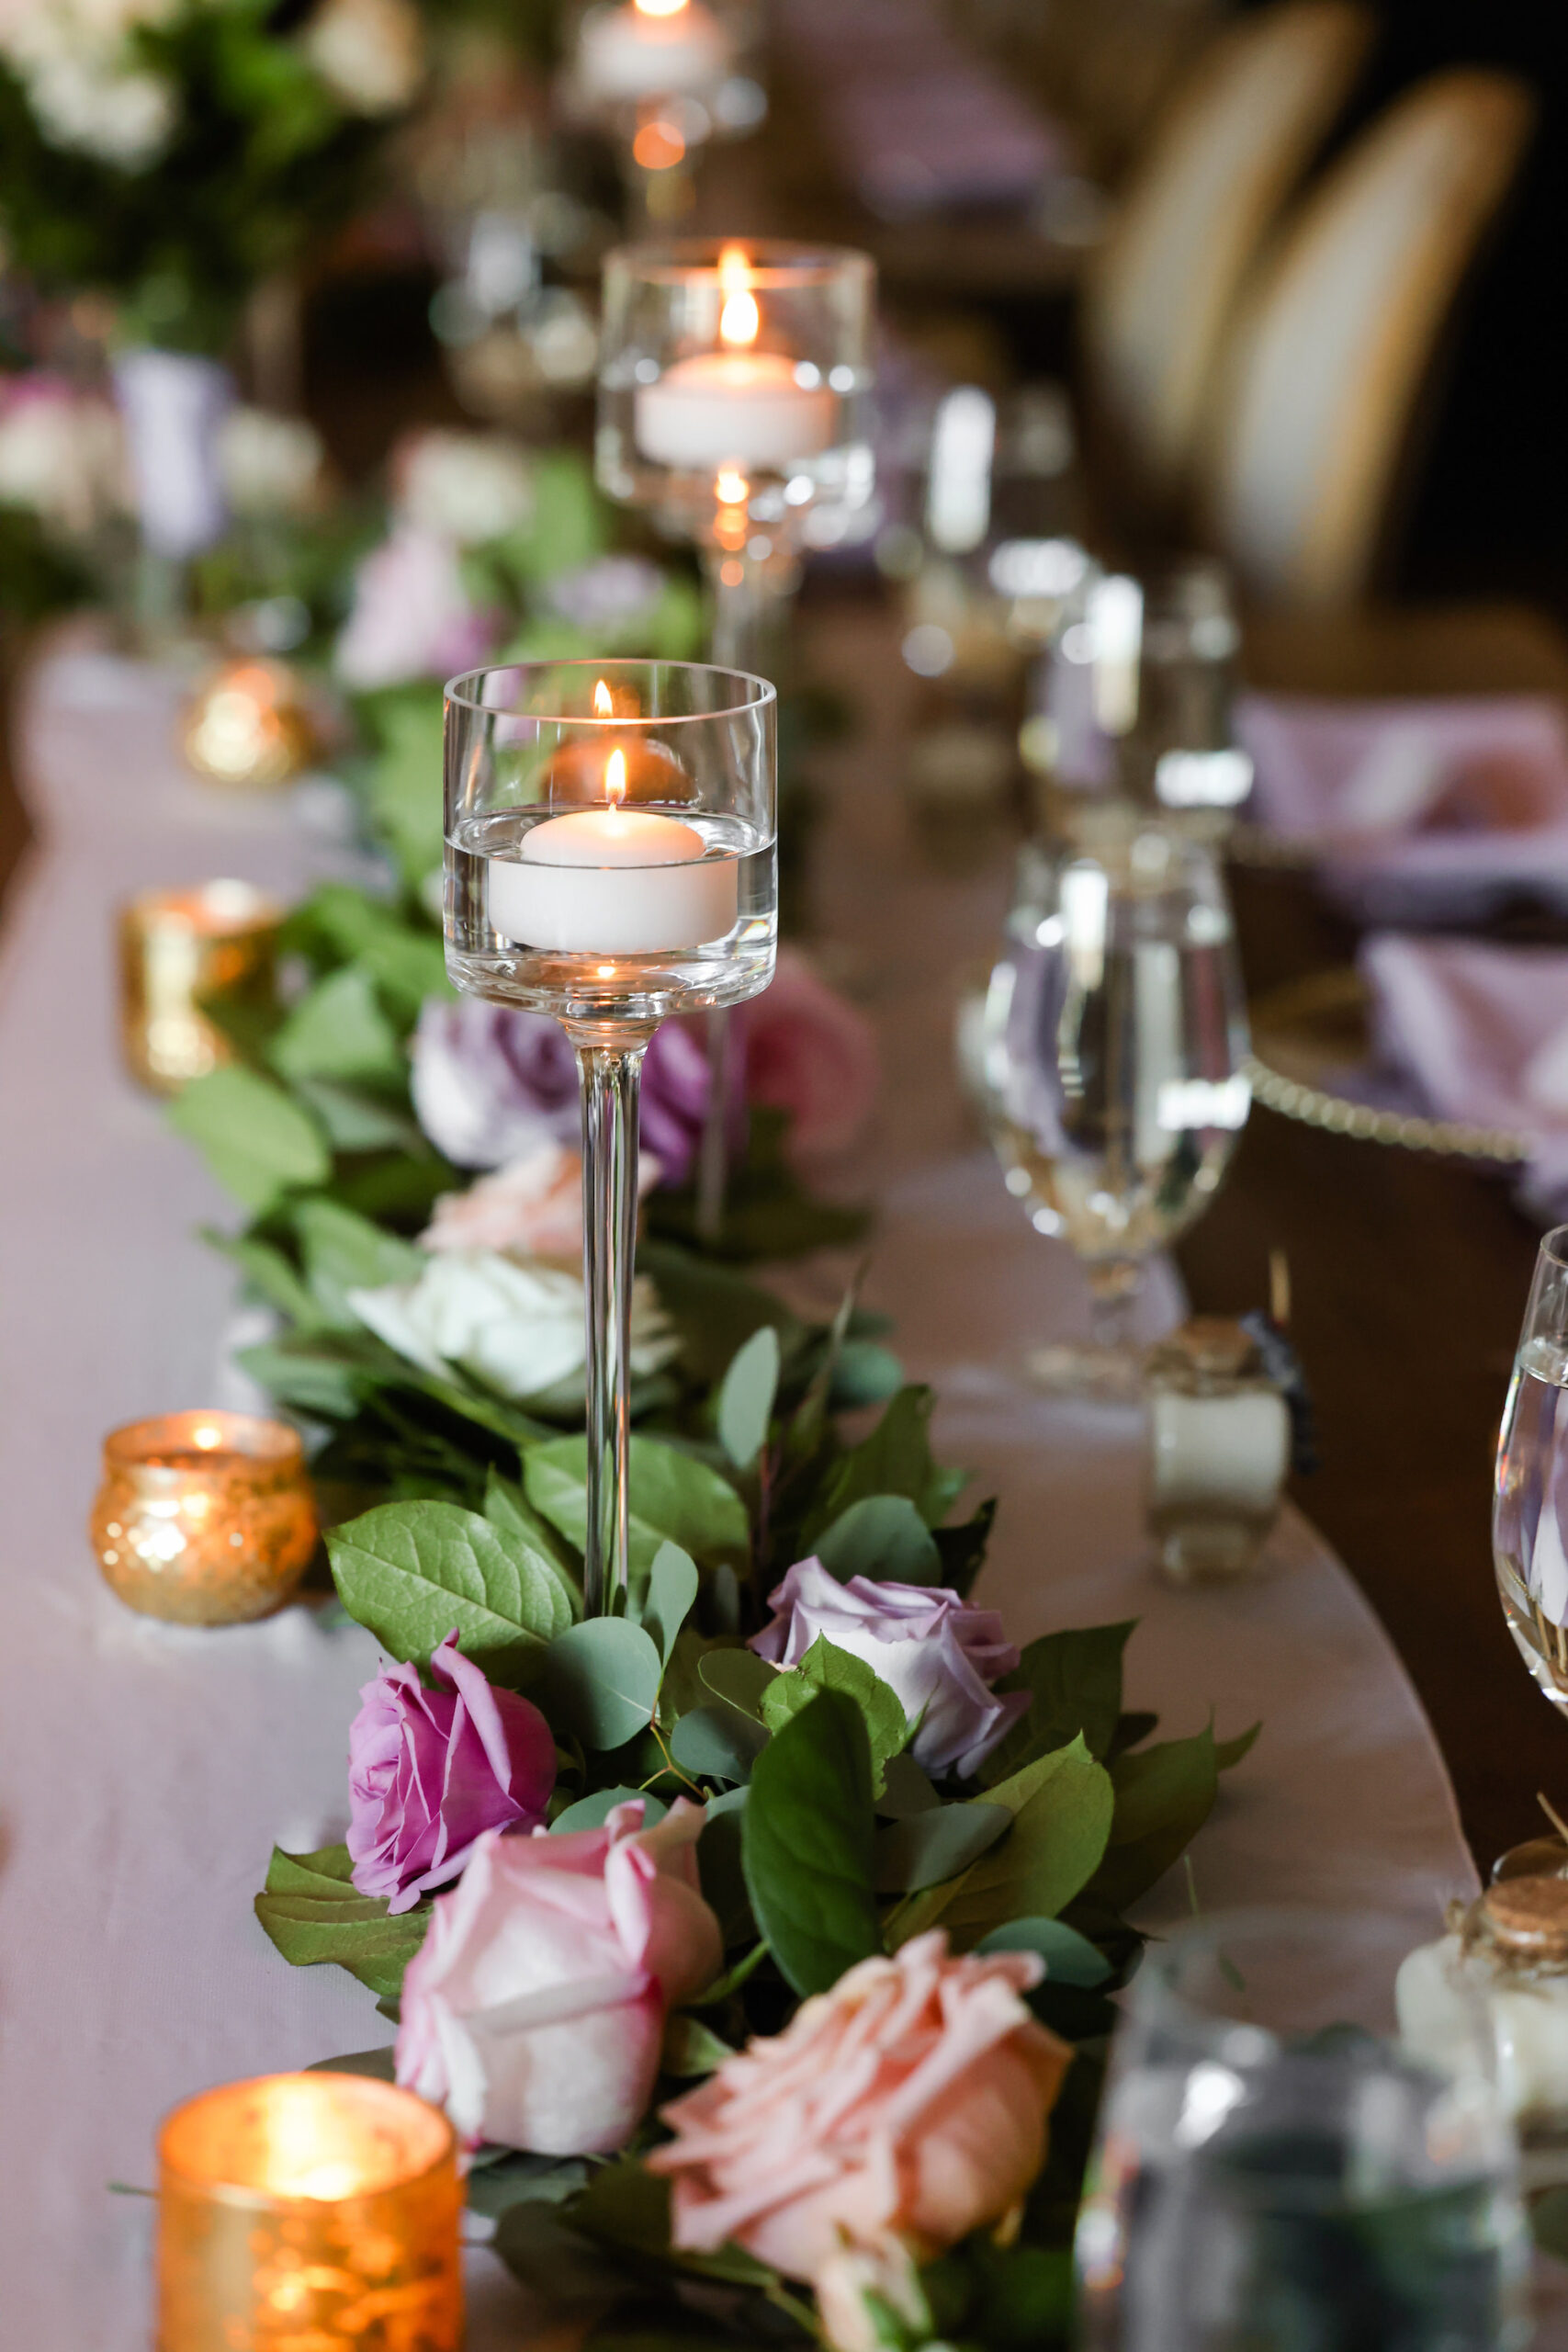 Southern Vintage Floating Candle, Roses and Greenery Centerpiece Inspiration